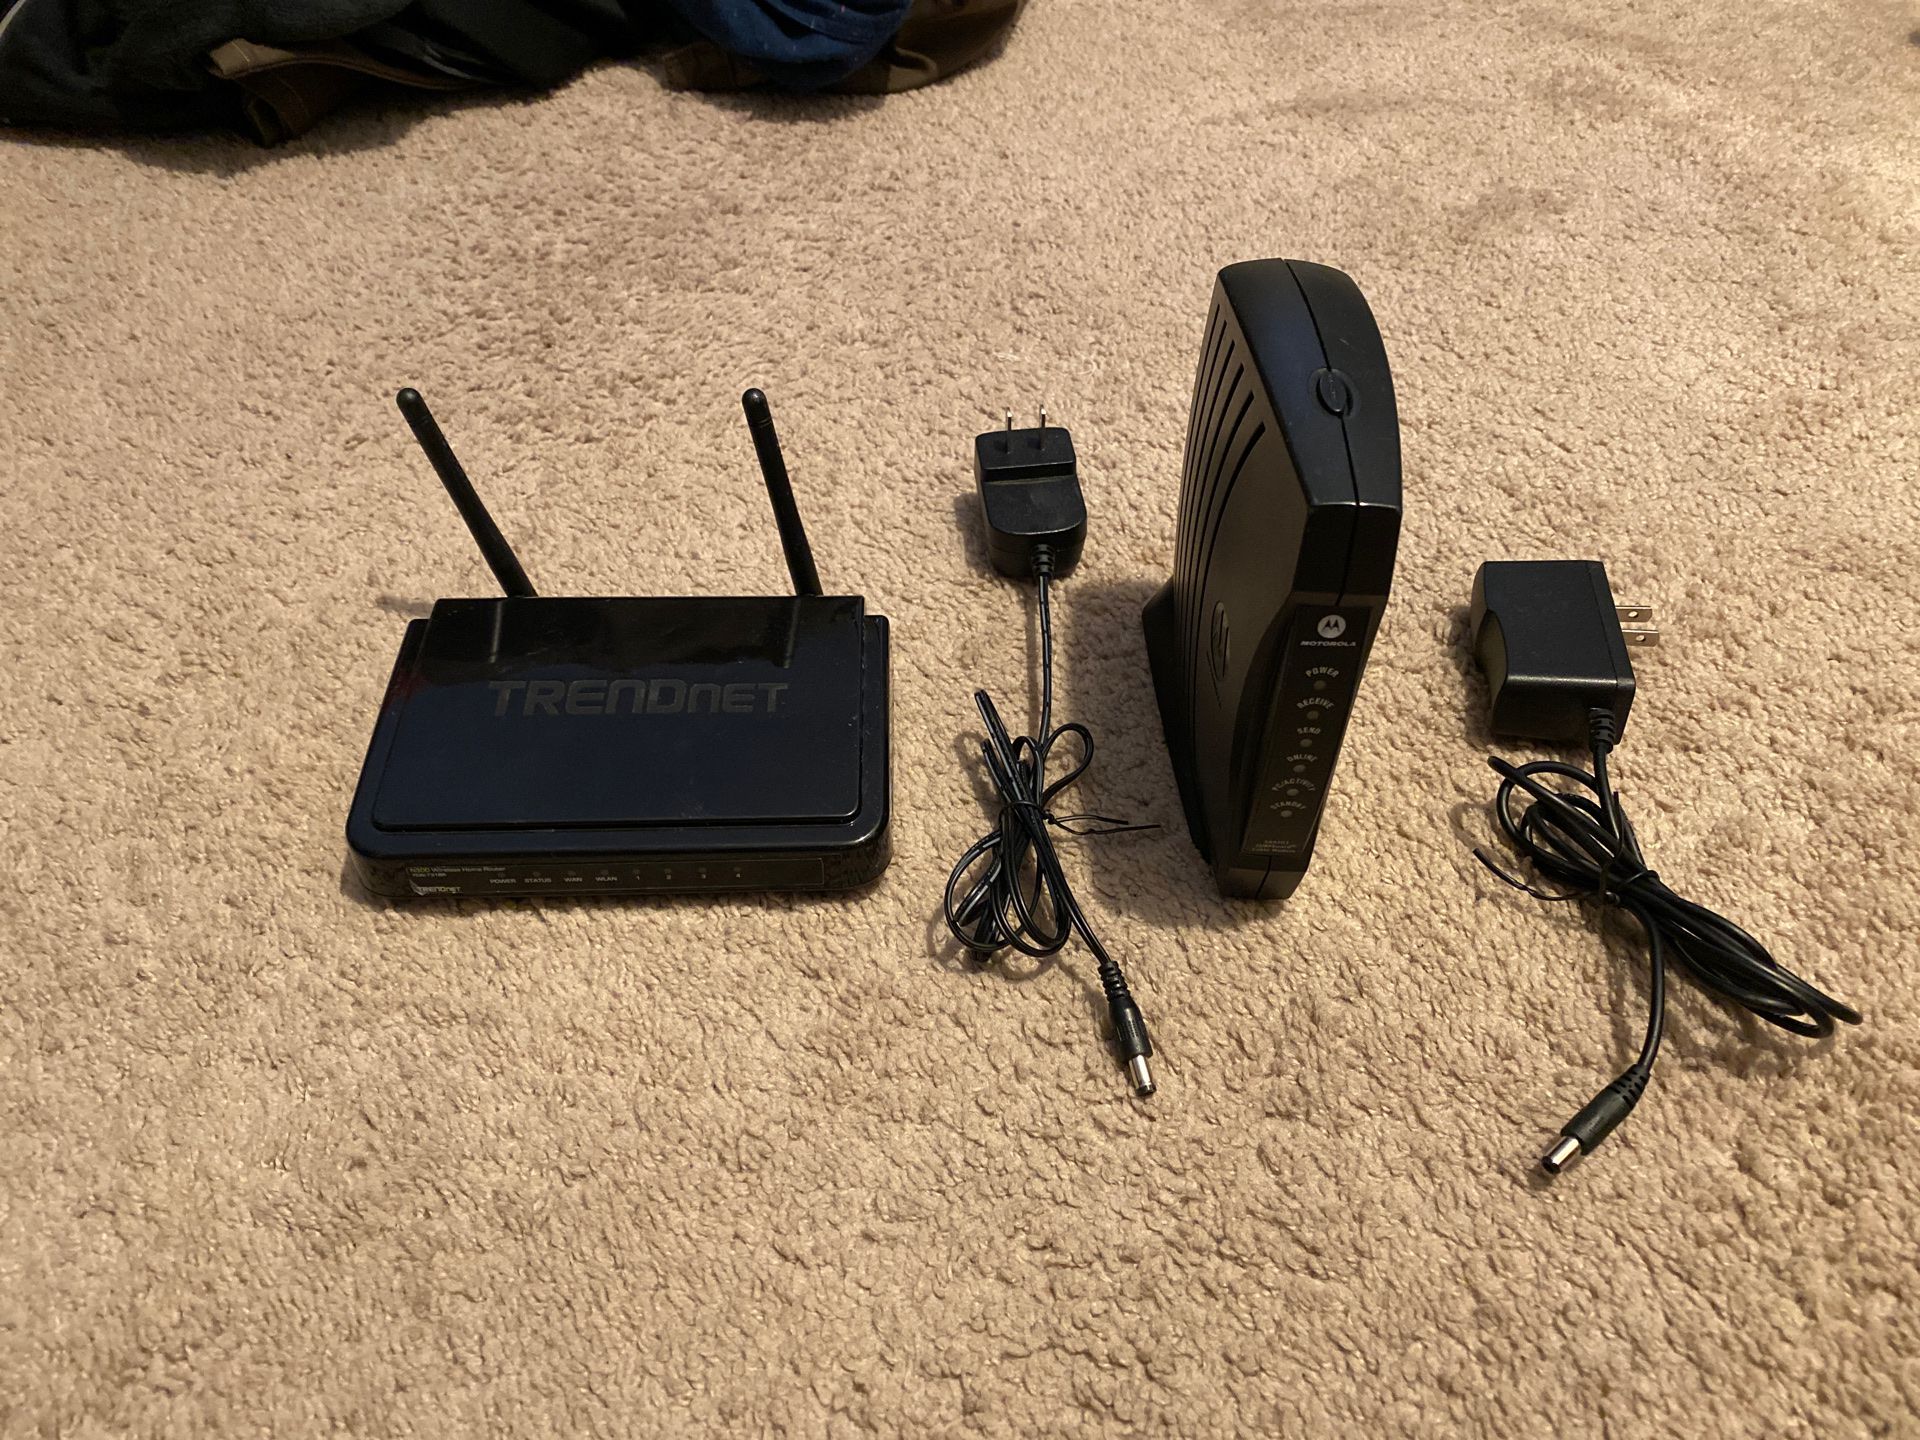 Modem and Router set